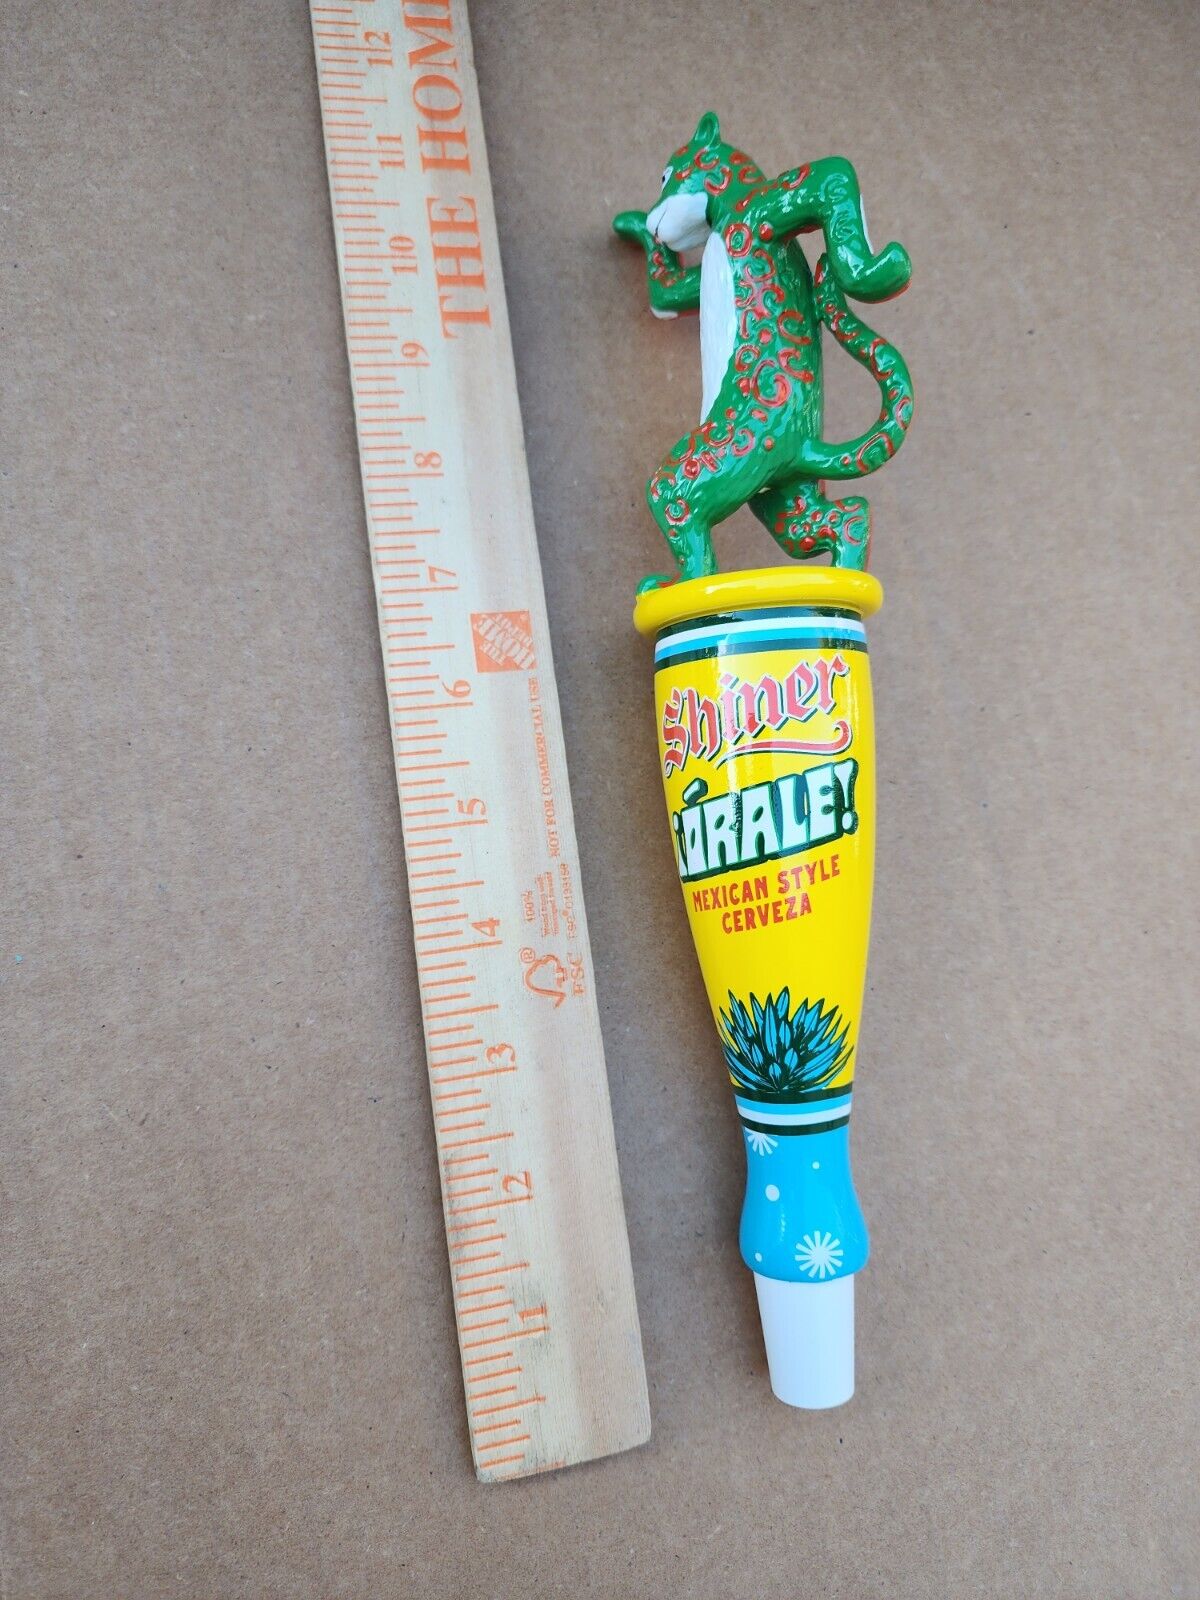 Shiner Orale Mexican Style Cerveza Beer Tap Handle Red Green Cheetah  Rare NIB